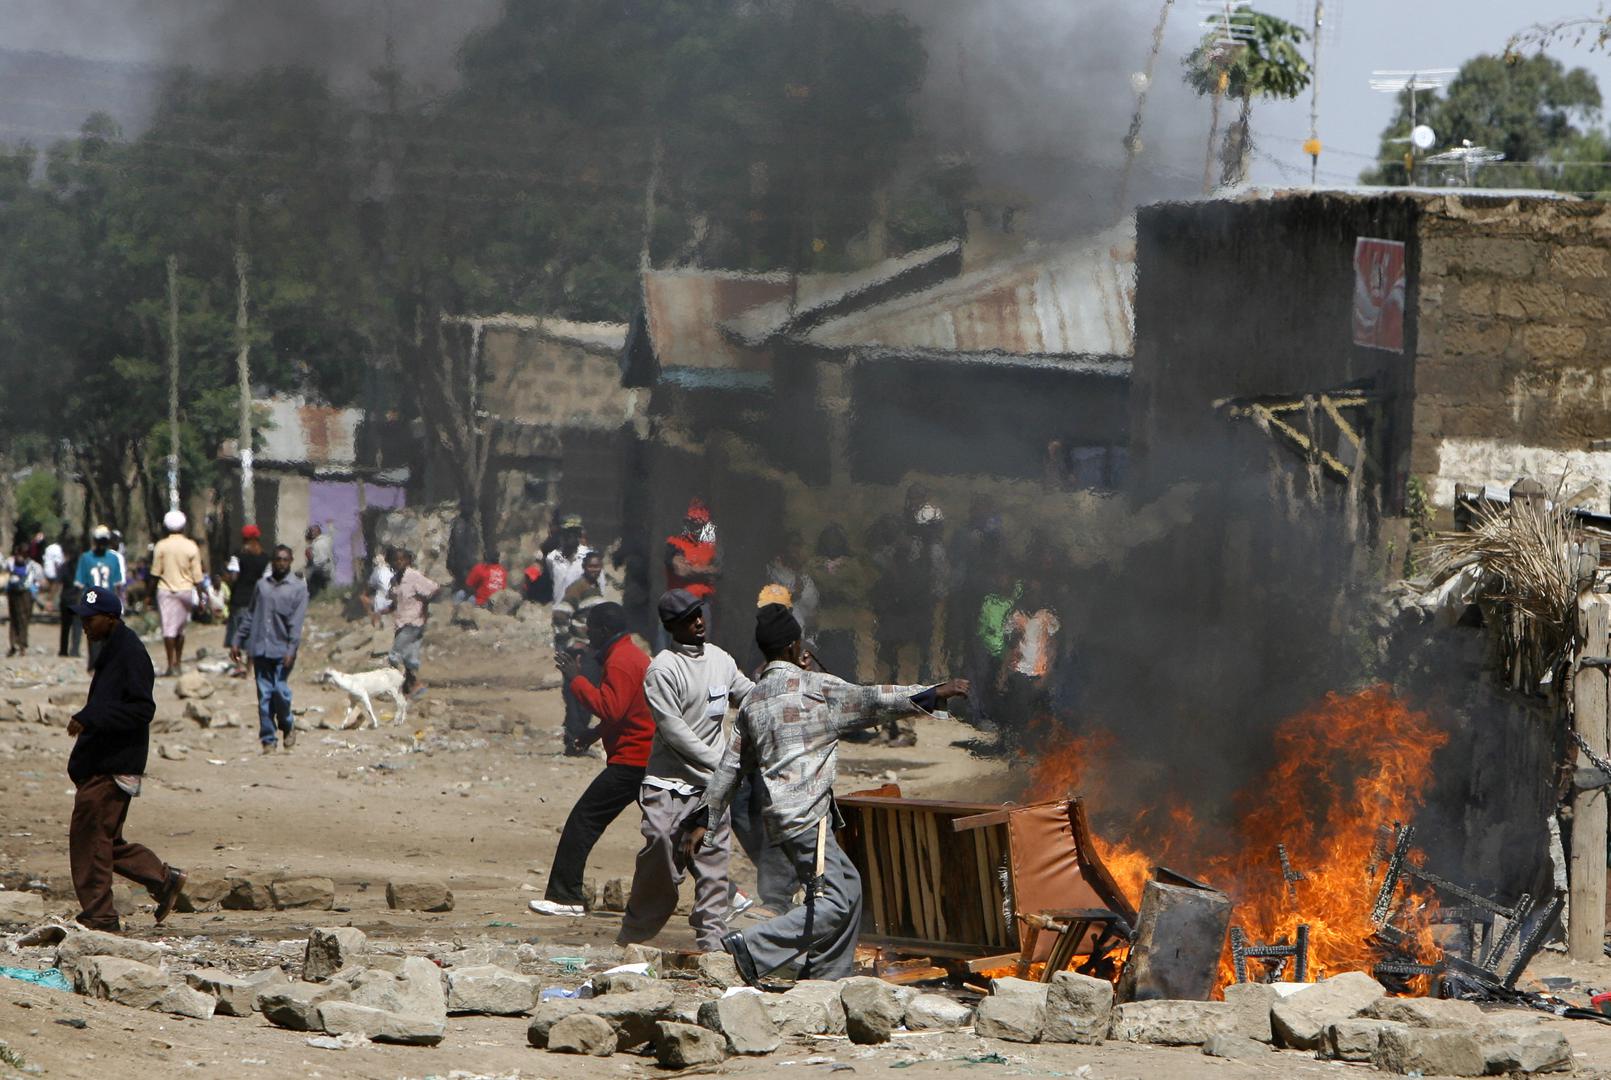 Ethnic clashes in Naivasha town, 60 km (37 miles) from the capital Nairobi, January 28, 2008. Violence erupted in Naivasha following a widely disputed presidential election. 